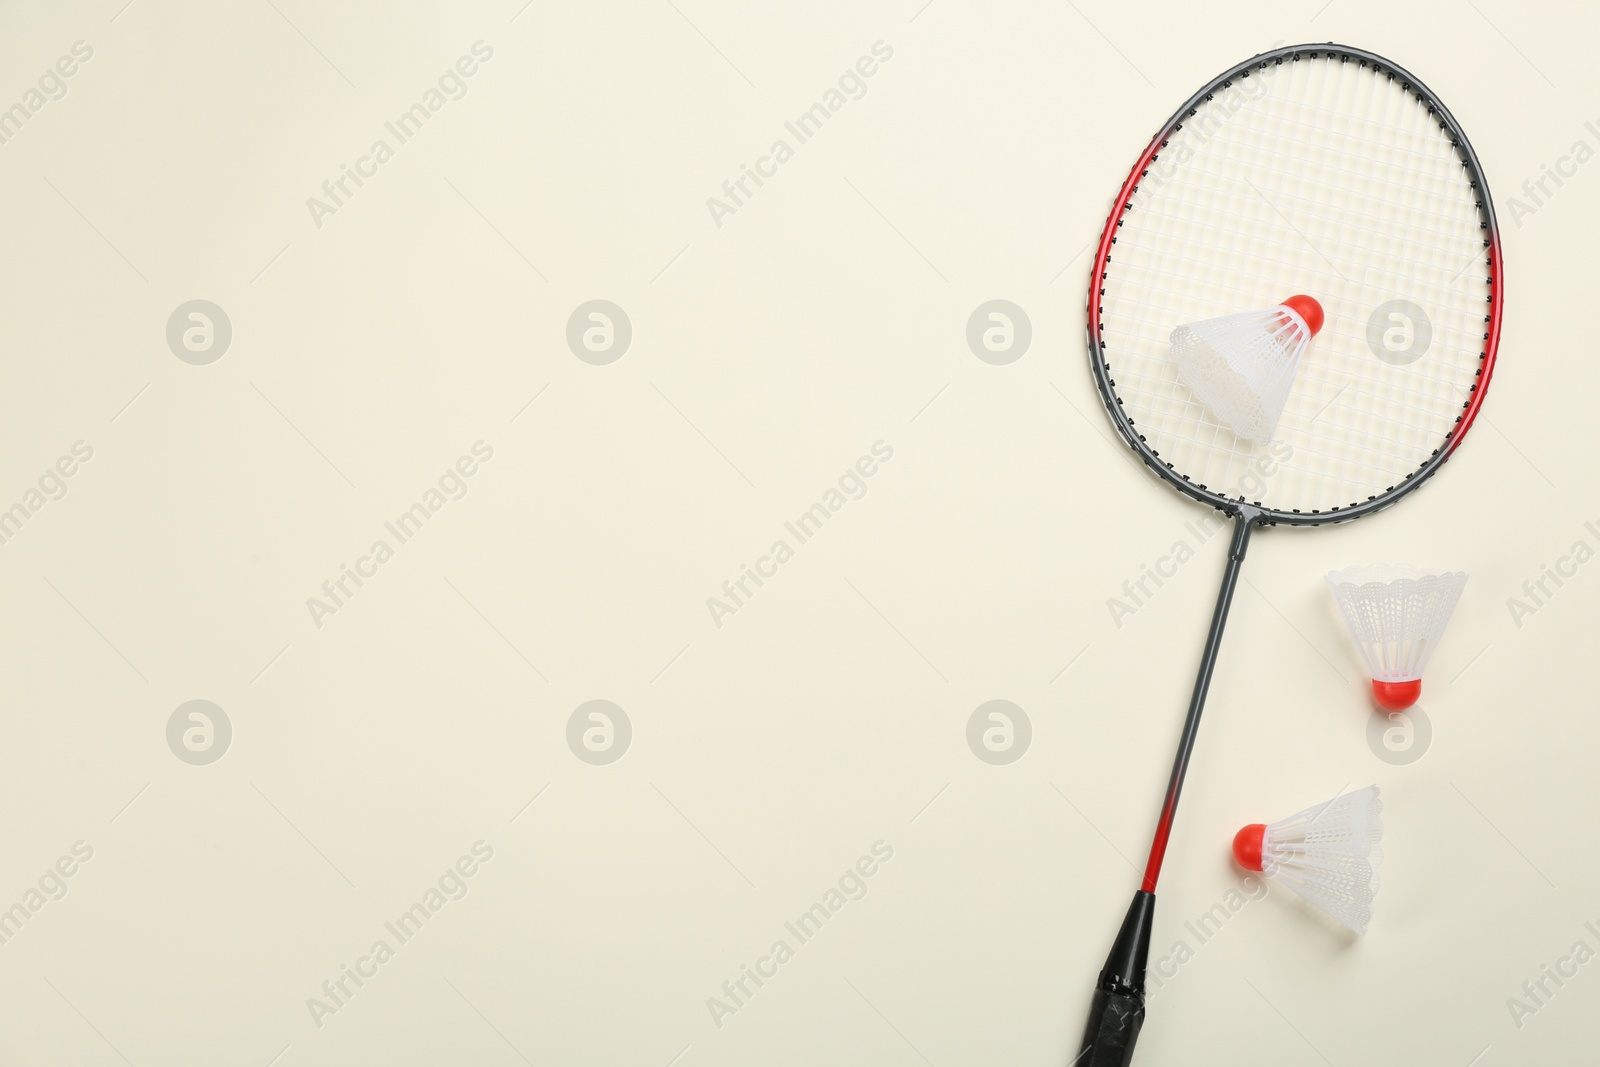 Photo of Racket and shuttlecocks on beige background, flat lay with space for text. Badminton equipment